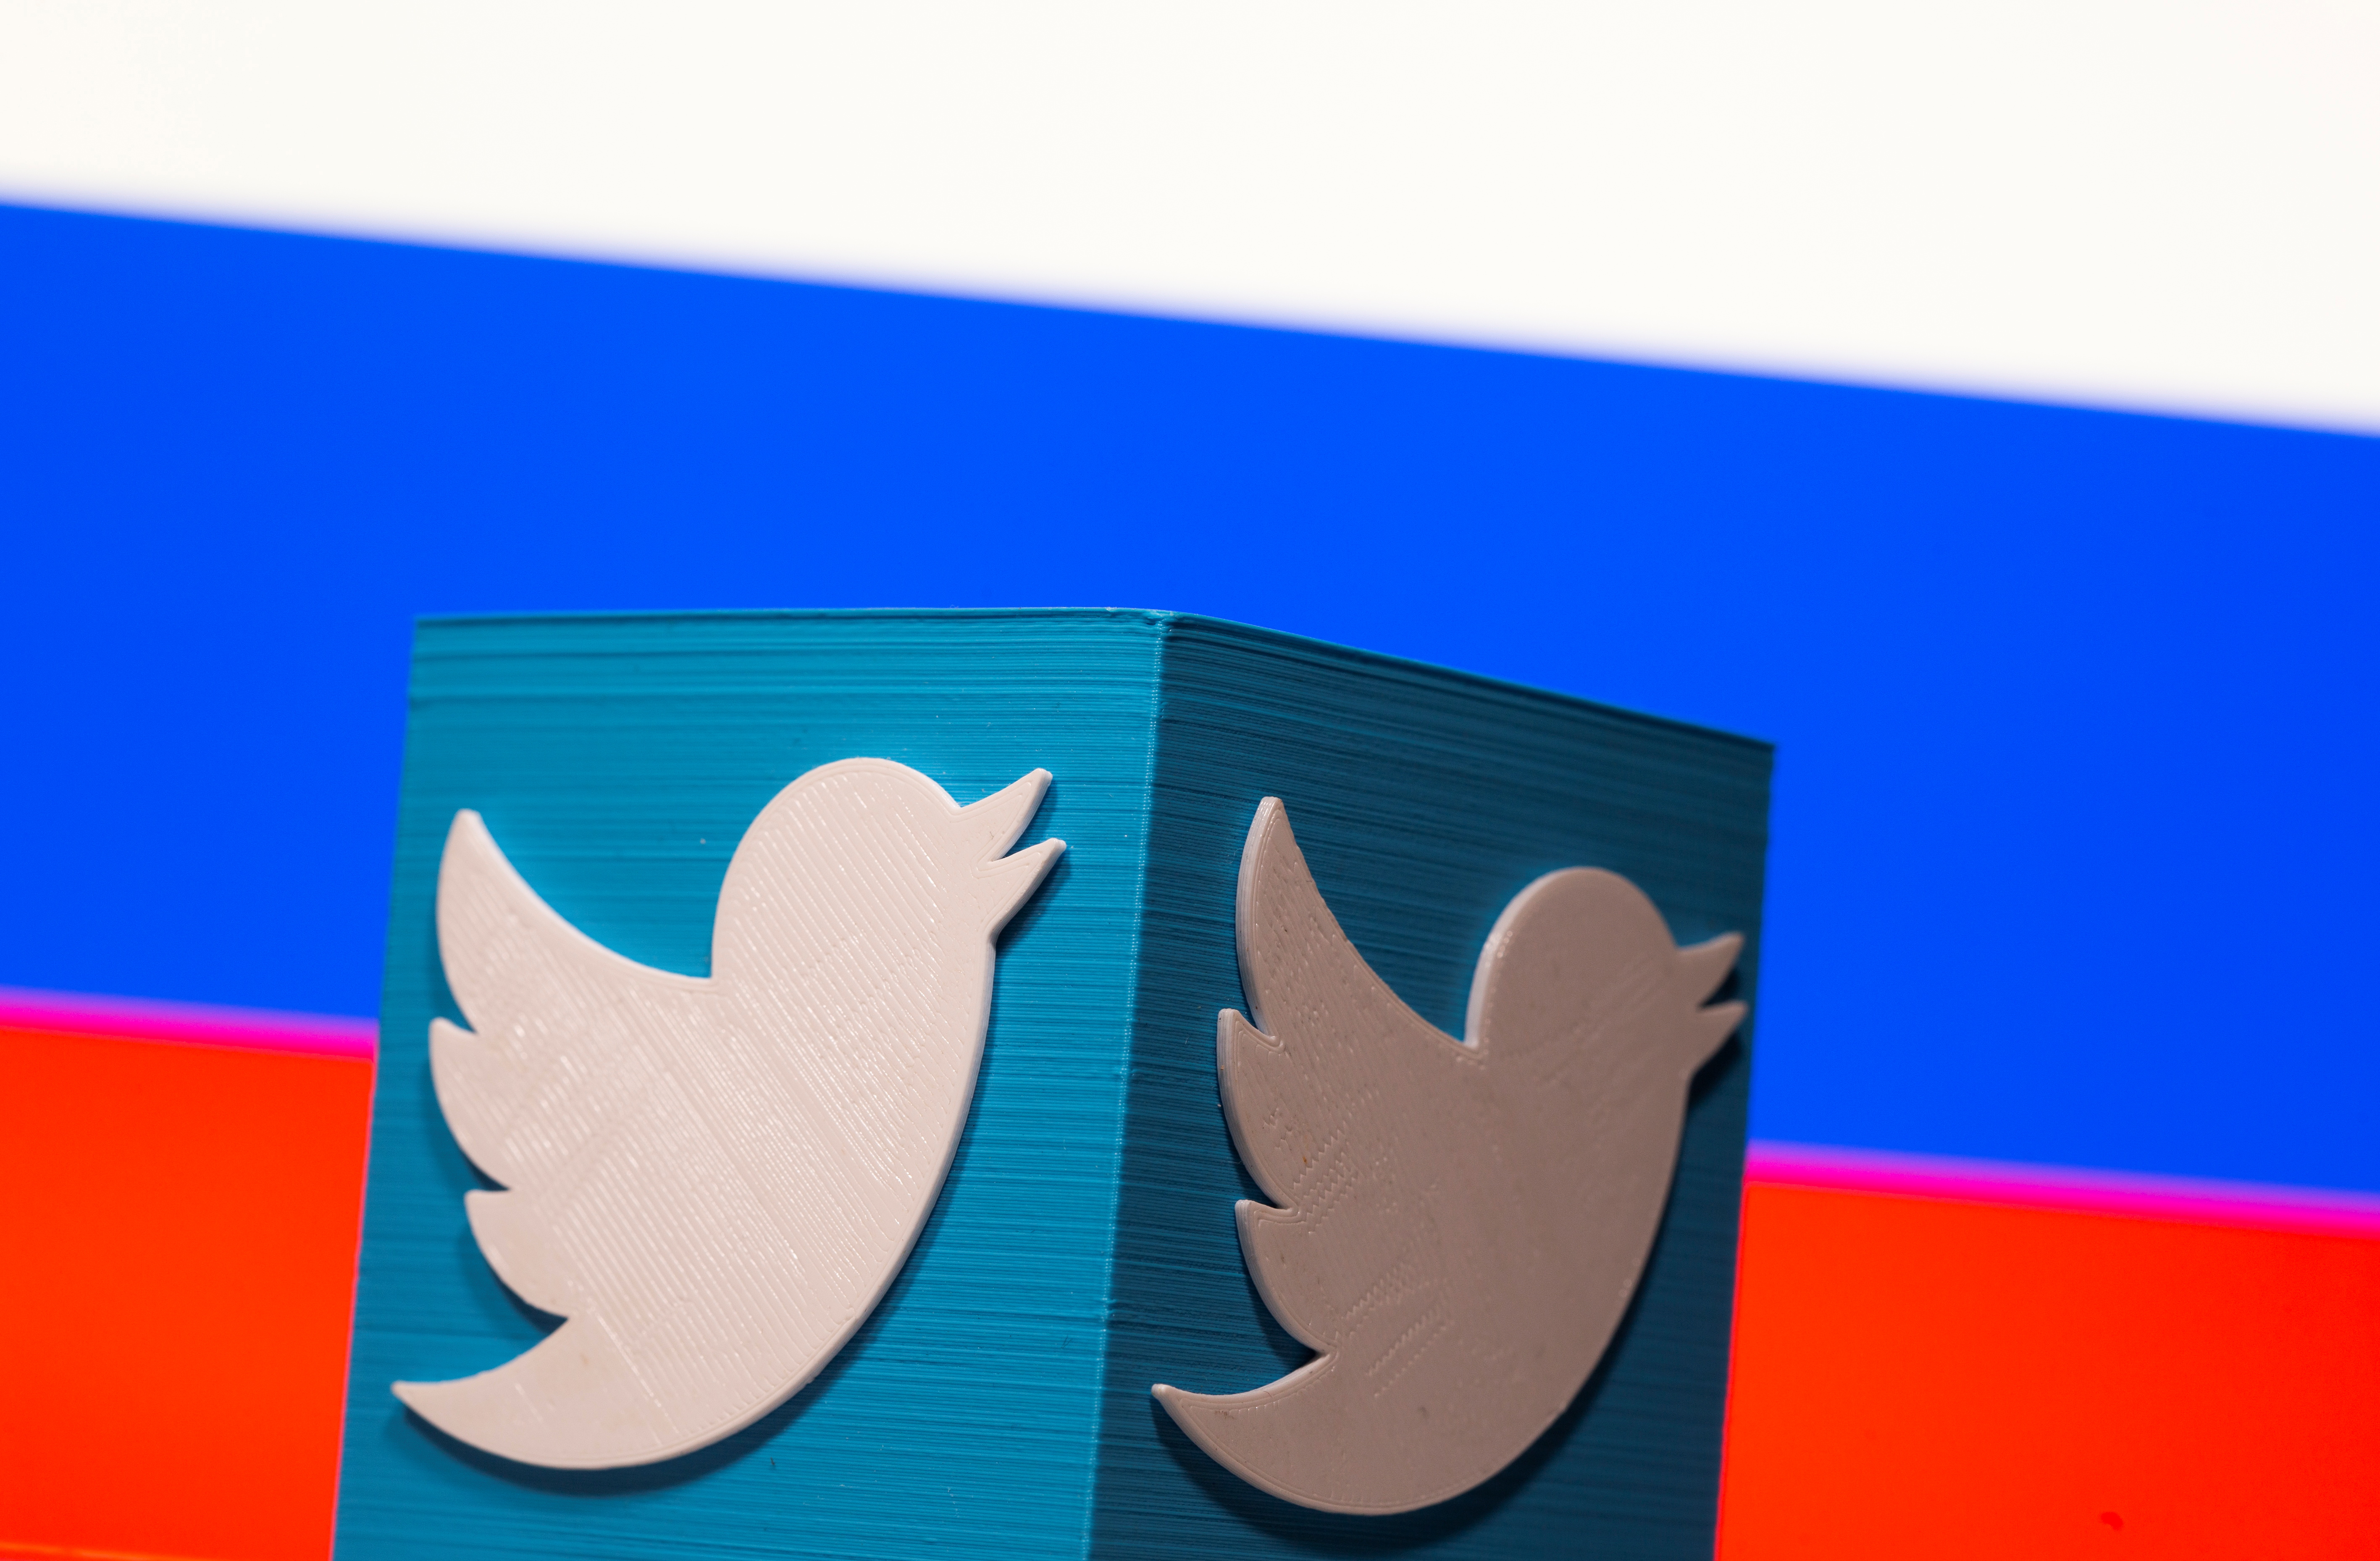 A 3D-printed Twitter logo is pictured in front of a Russian flag in this illustration